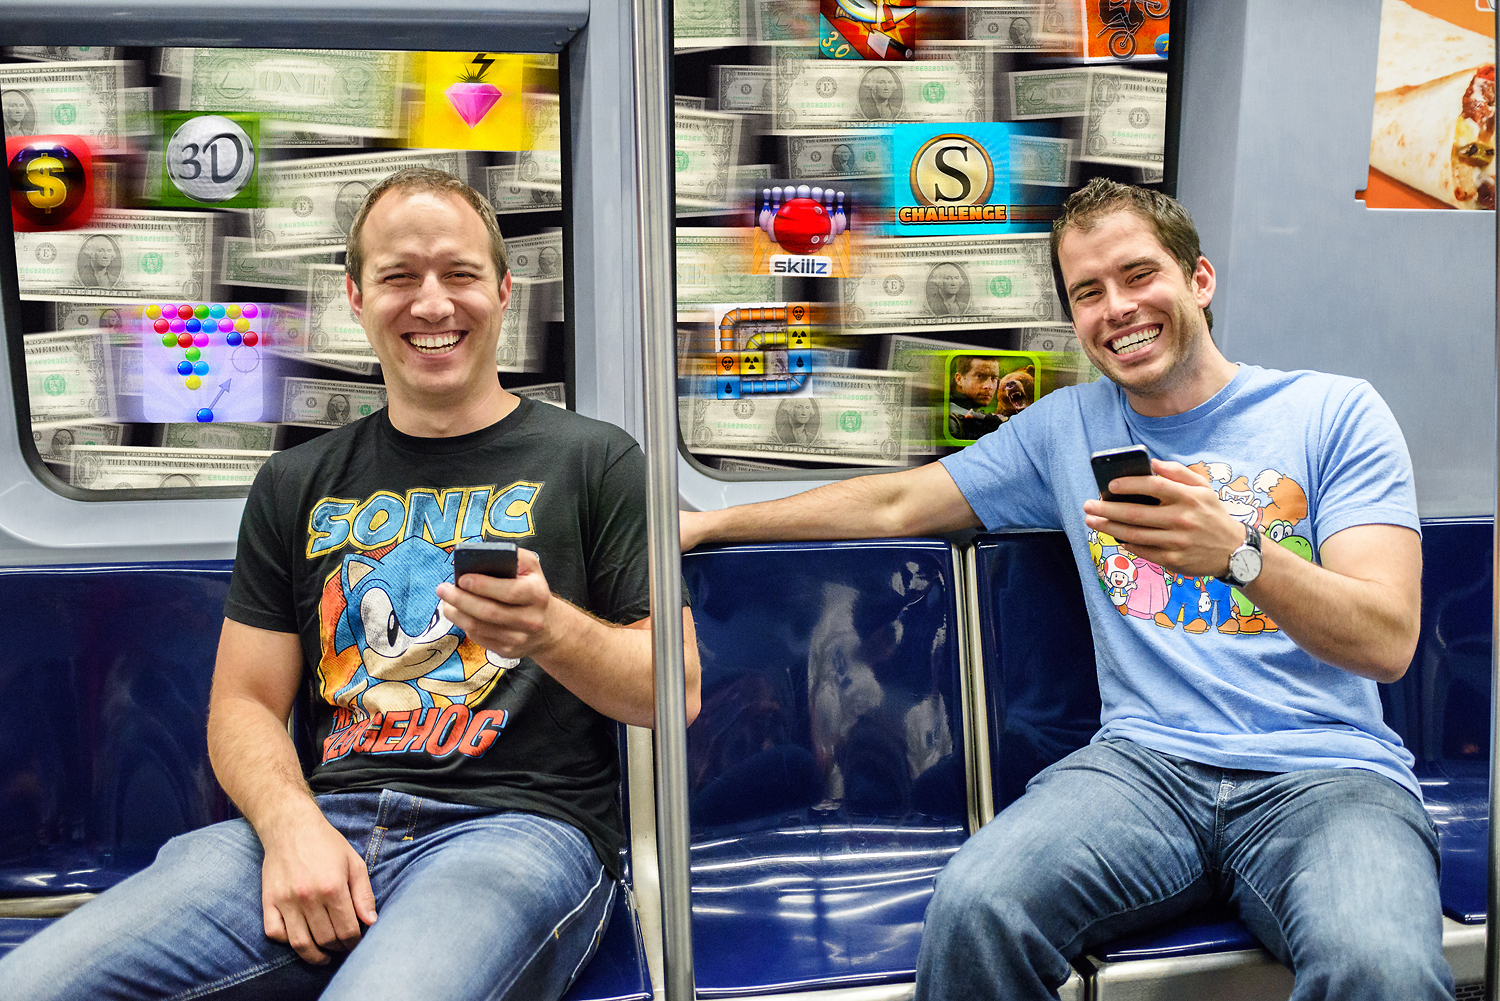    Mobile gaming for money -&nbsp;Most people use their app while commuting, so we rode&nbsp;the T for an afternoon   